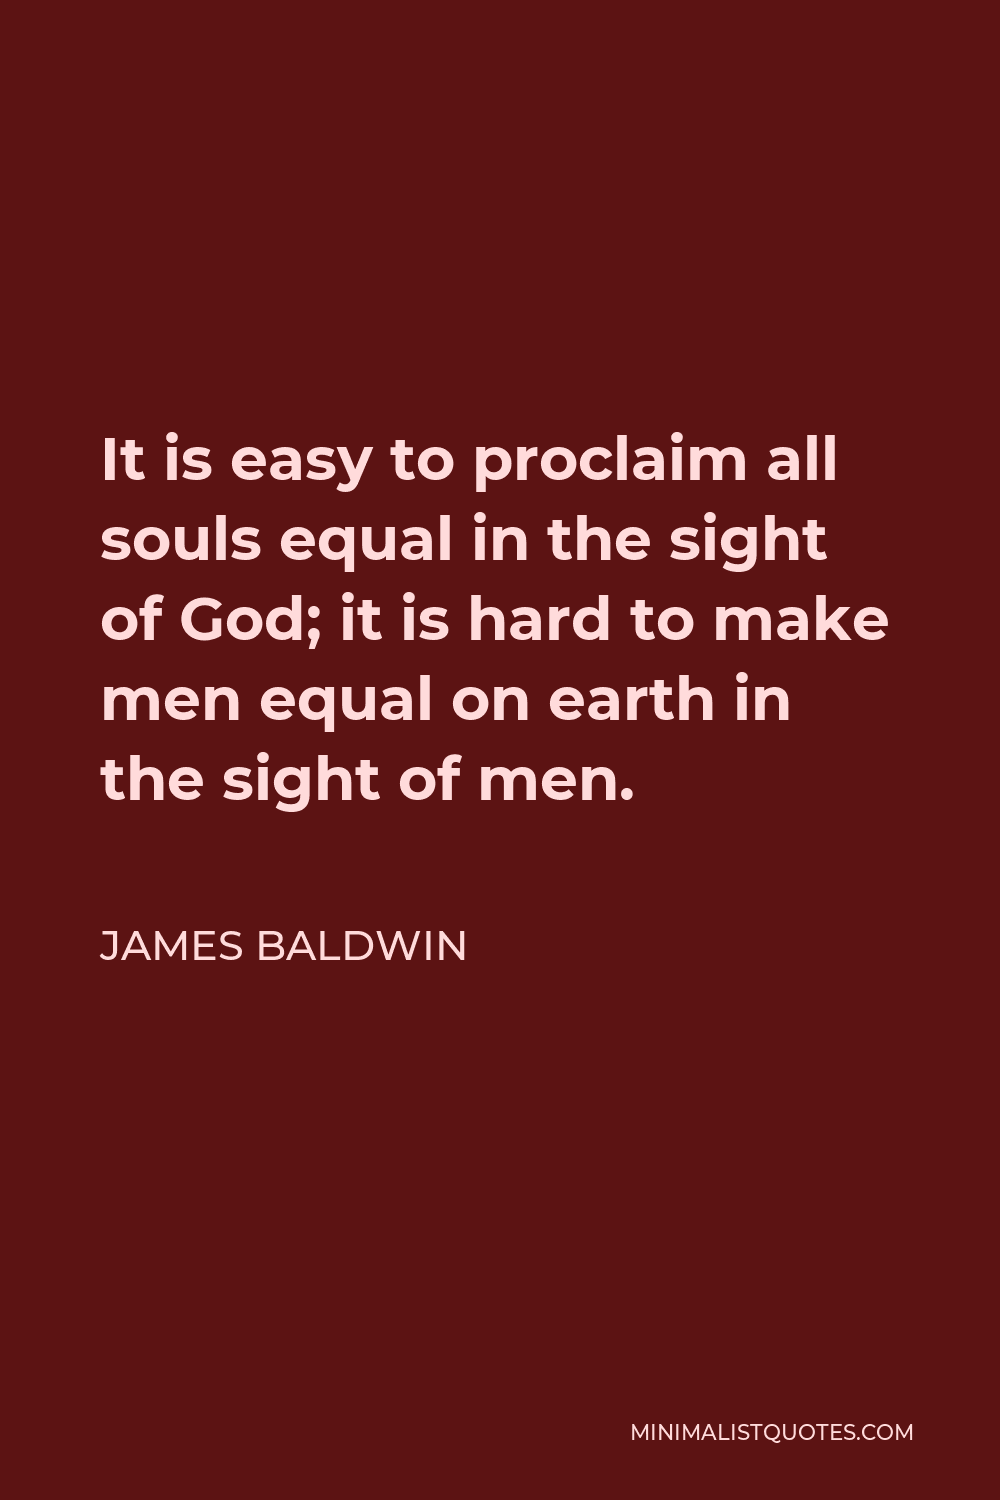 James Baldwin Quote - It is easy to proclaim all souls equal in the sight of God; it is hard to make men equal on earth in the sight of men.